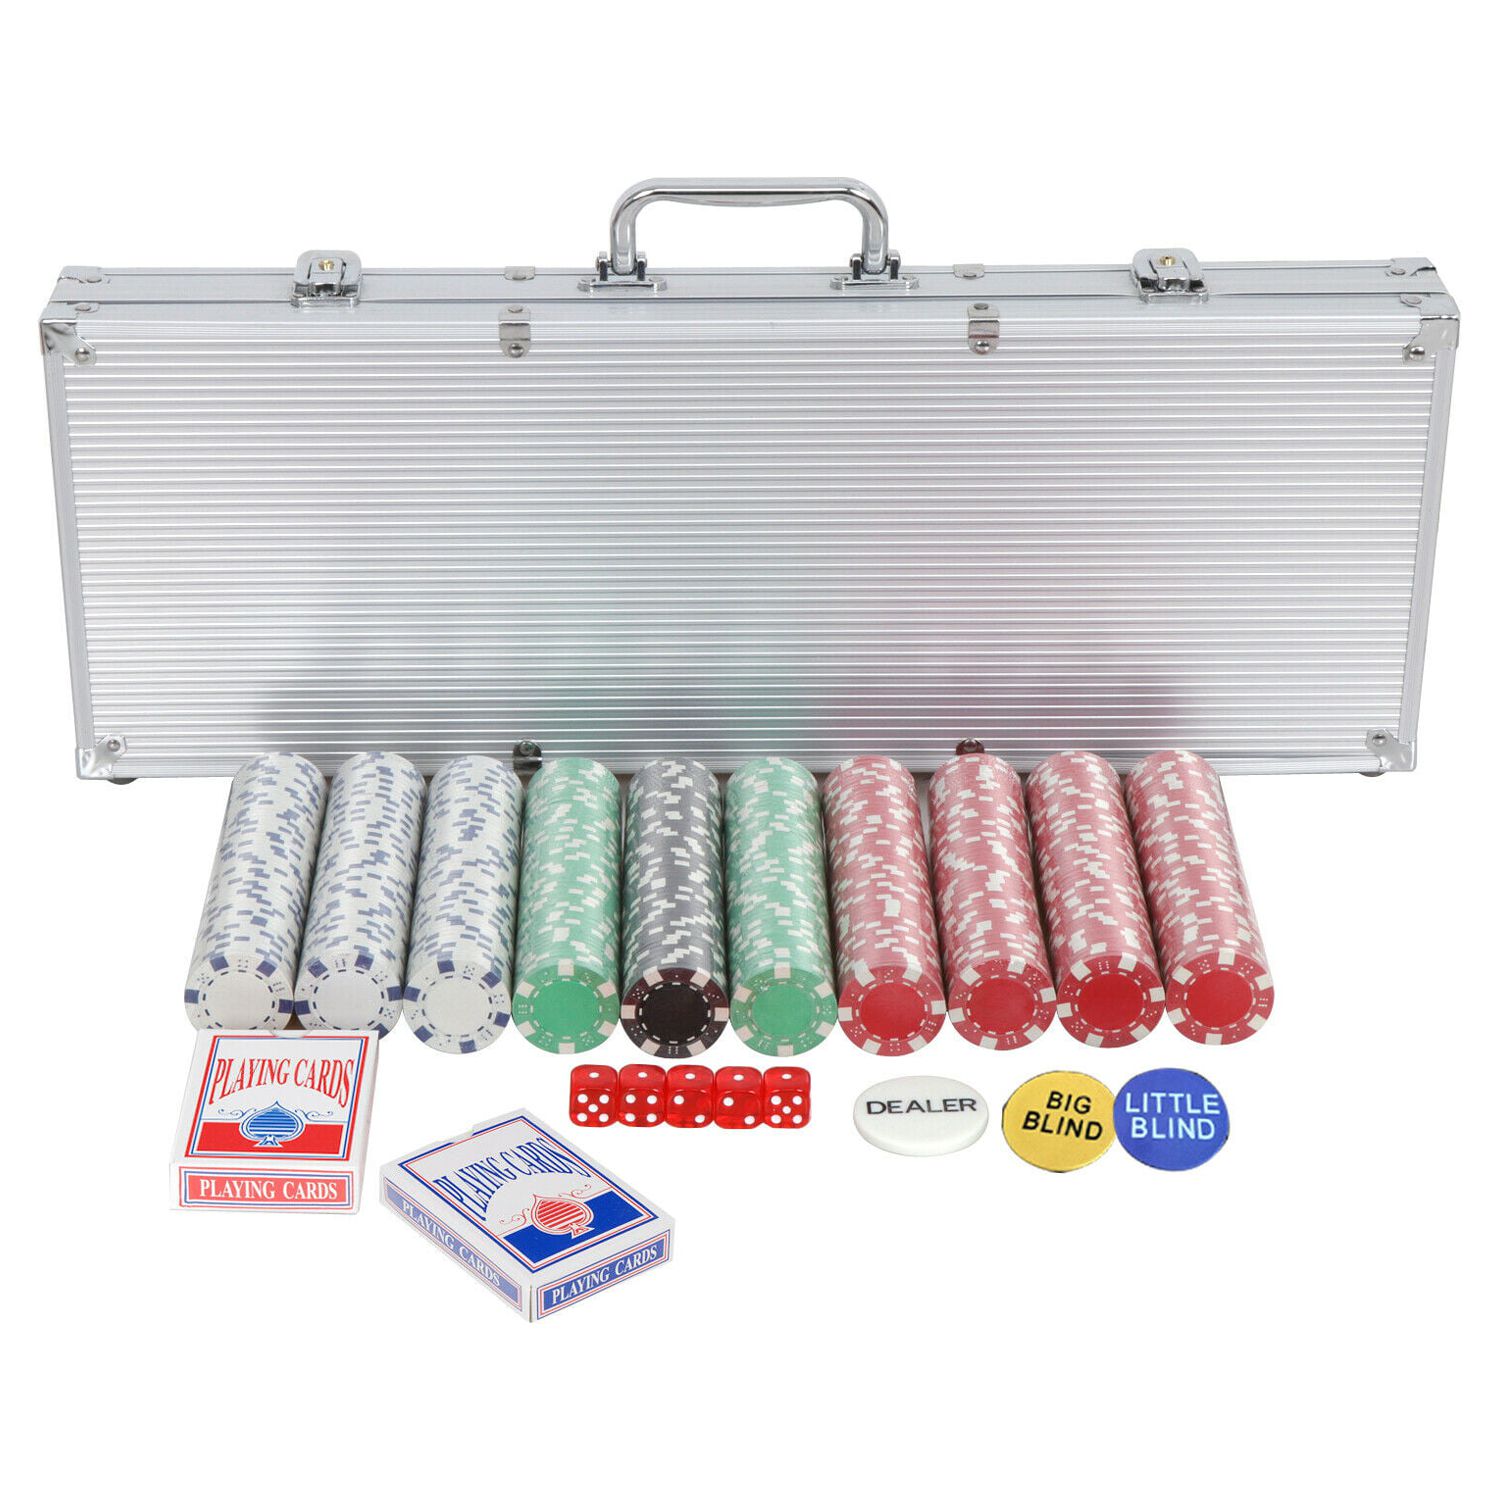 ZENY 500 Poker Chip Set 11.5 Gram Dice Style Aluminum Case, Cards, Dices, Blind Button - image 5 of 6